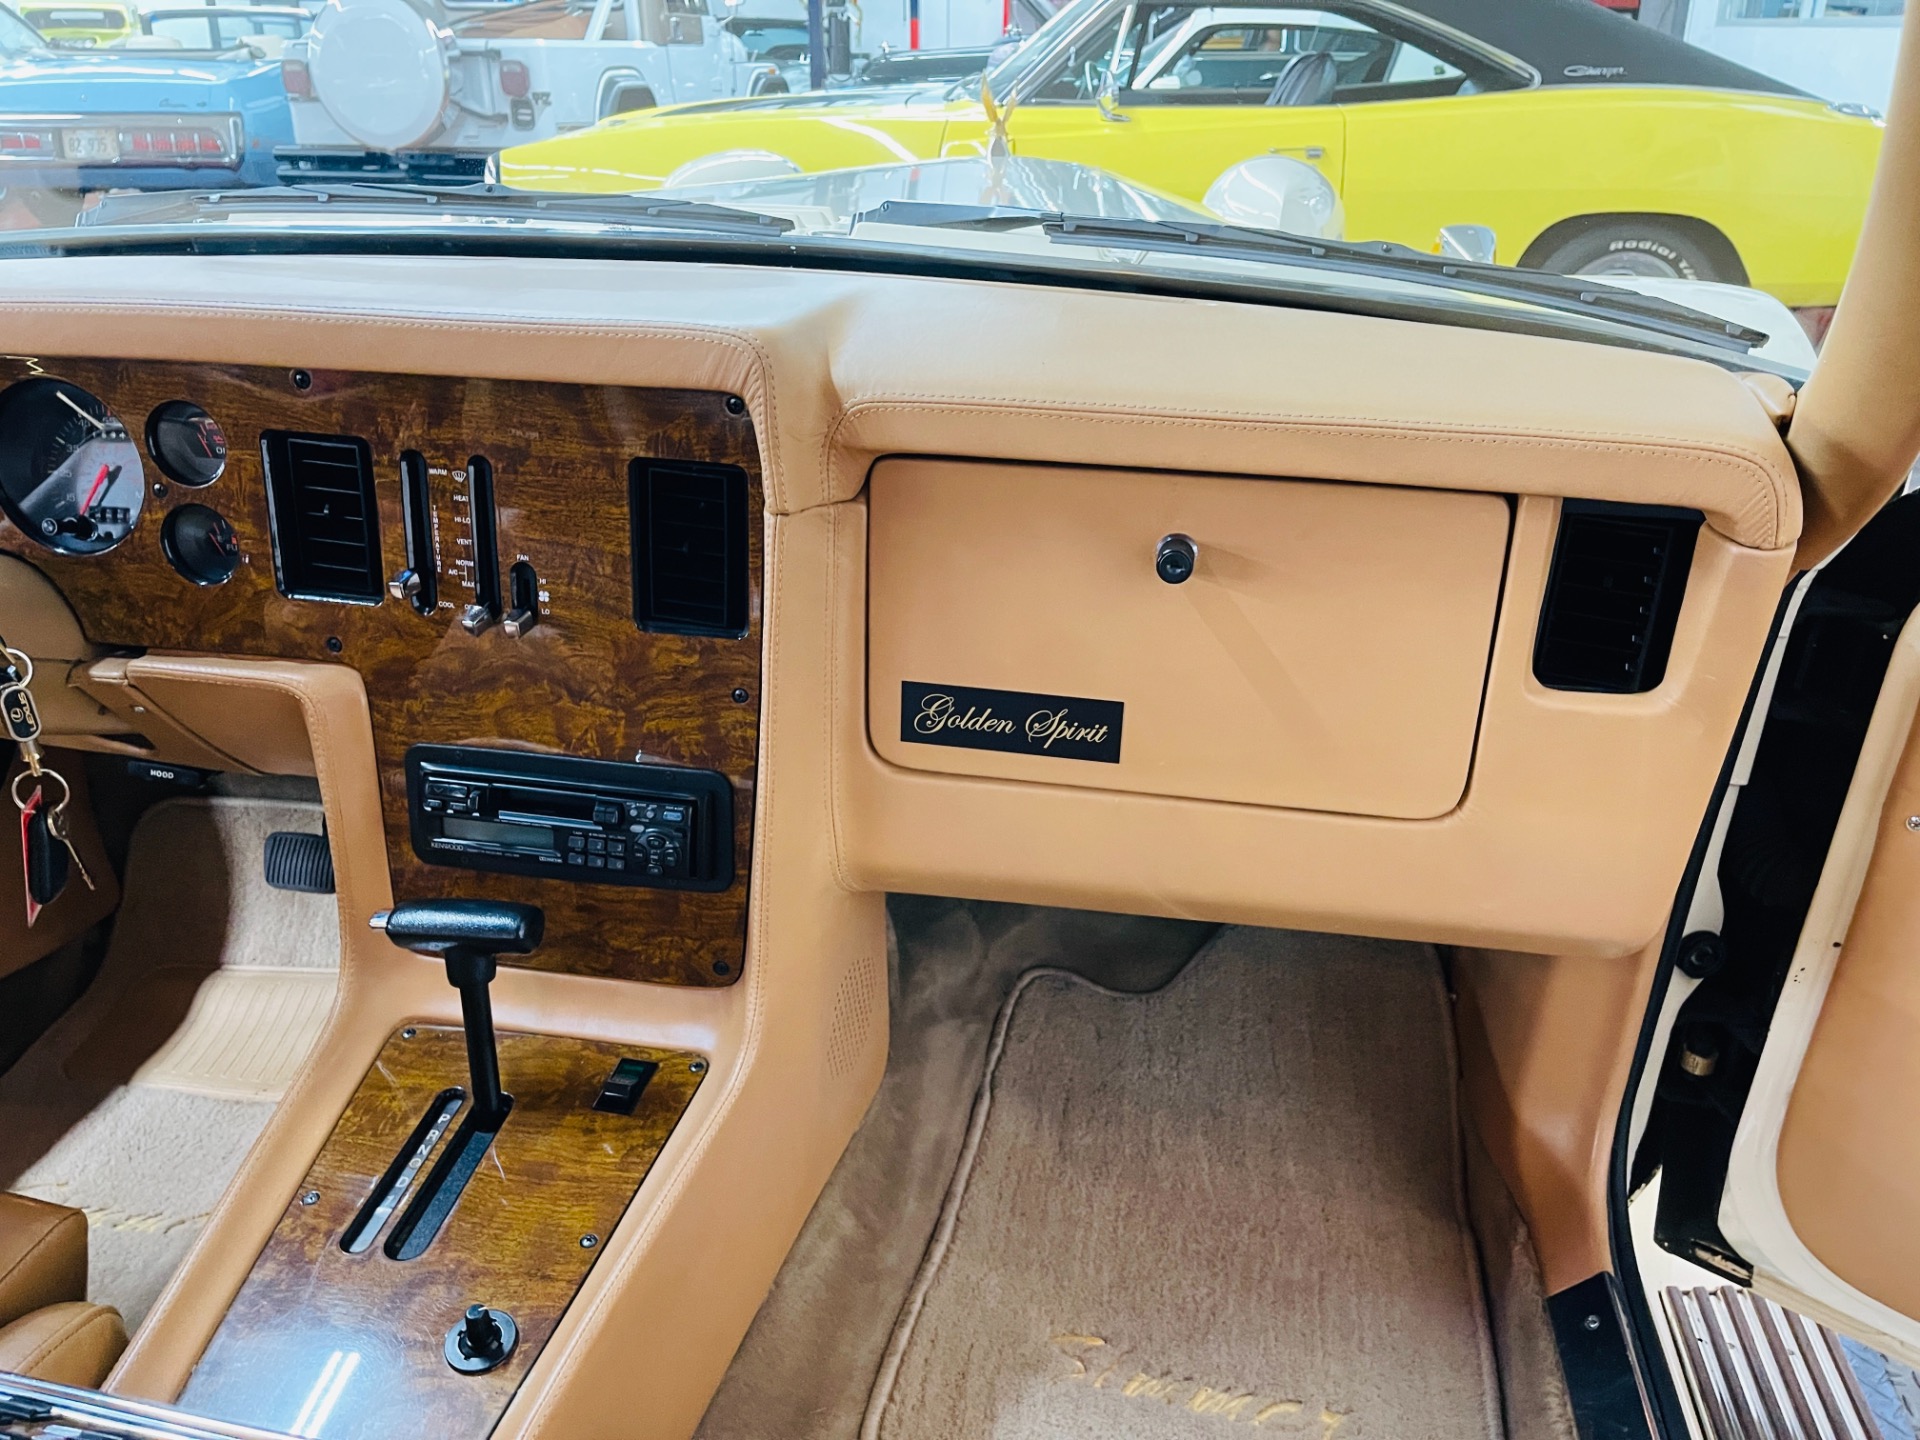 Used 1986 Ford Zimmer -GOLDEN SPIRIT - LIKE NEW CONDITION - LOW MILES - SEE VIDEO | Mundelein, IL